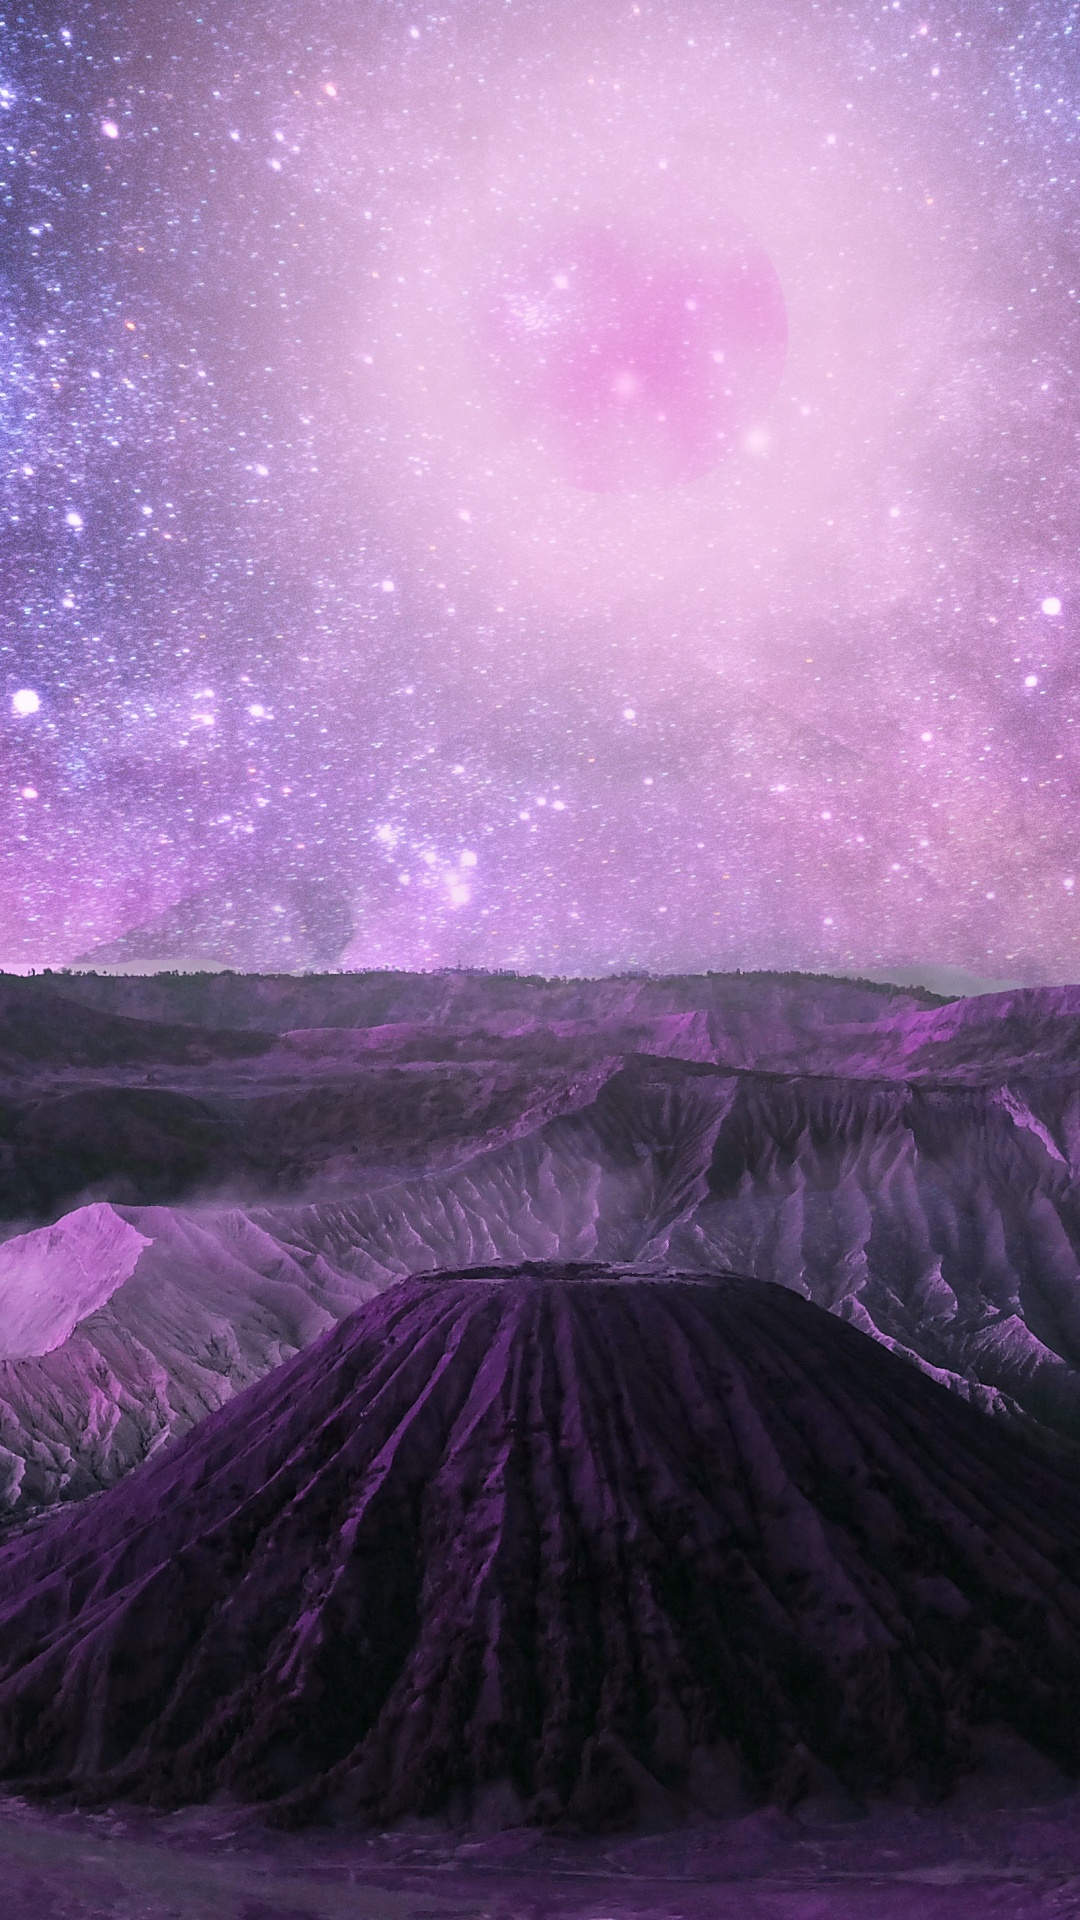 Purple and Black Sky With Stars. Wallpaper in 1080x1920 Resolution